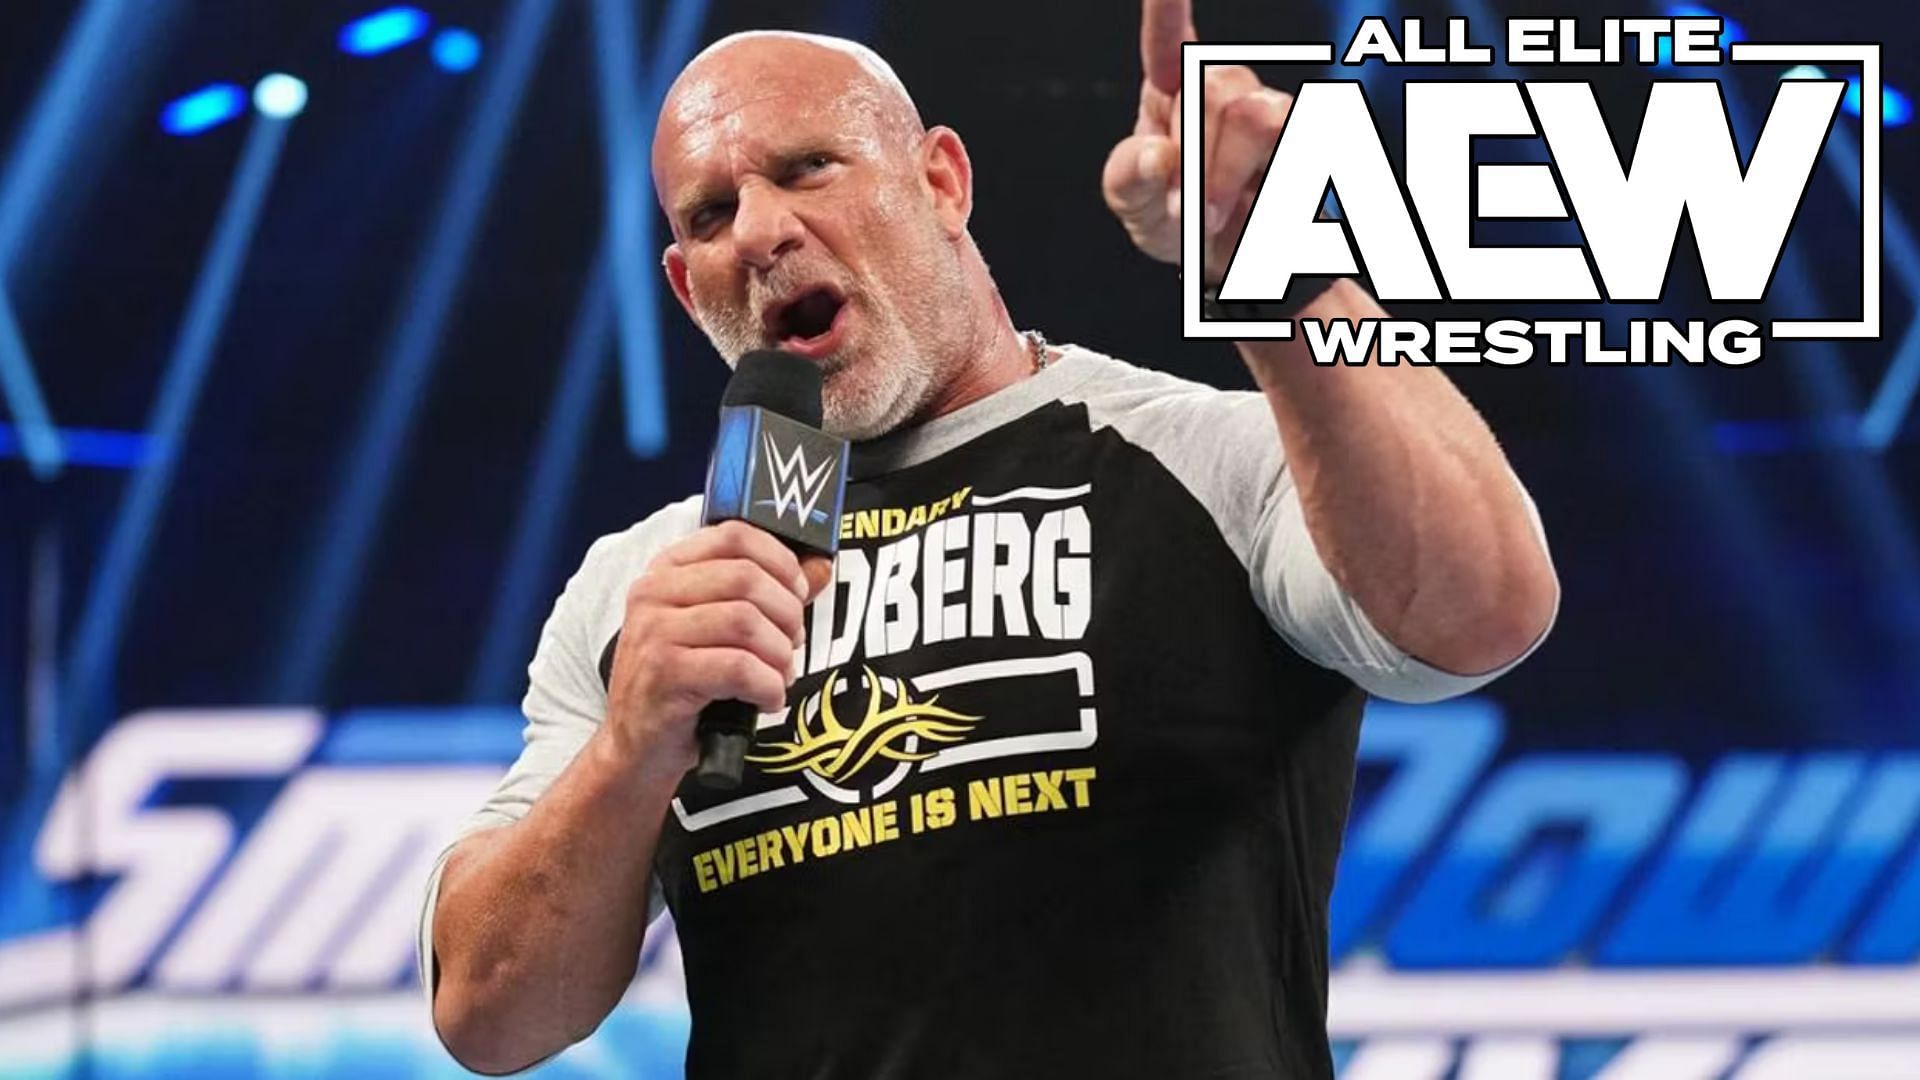 Could Goldberg clash with this AEW star within the year?